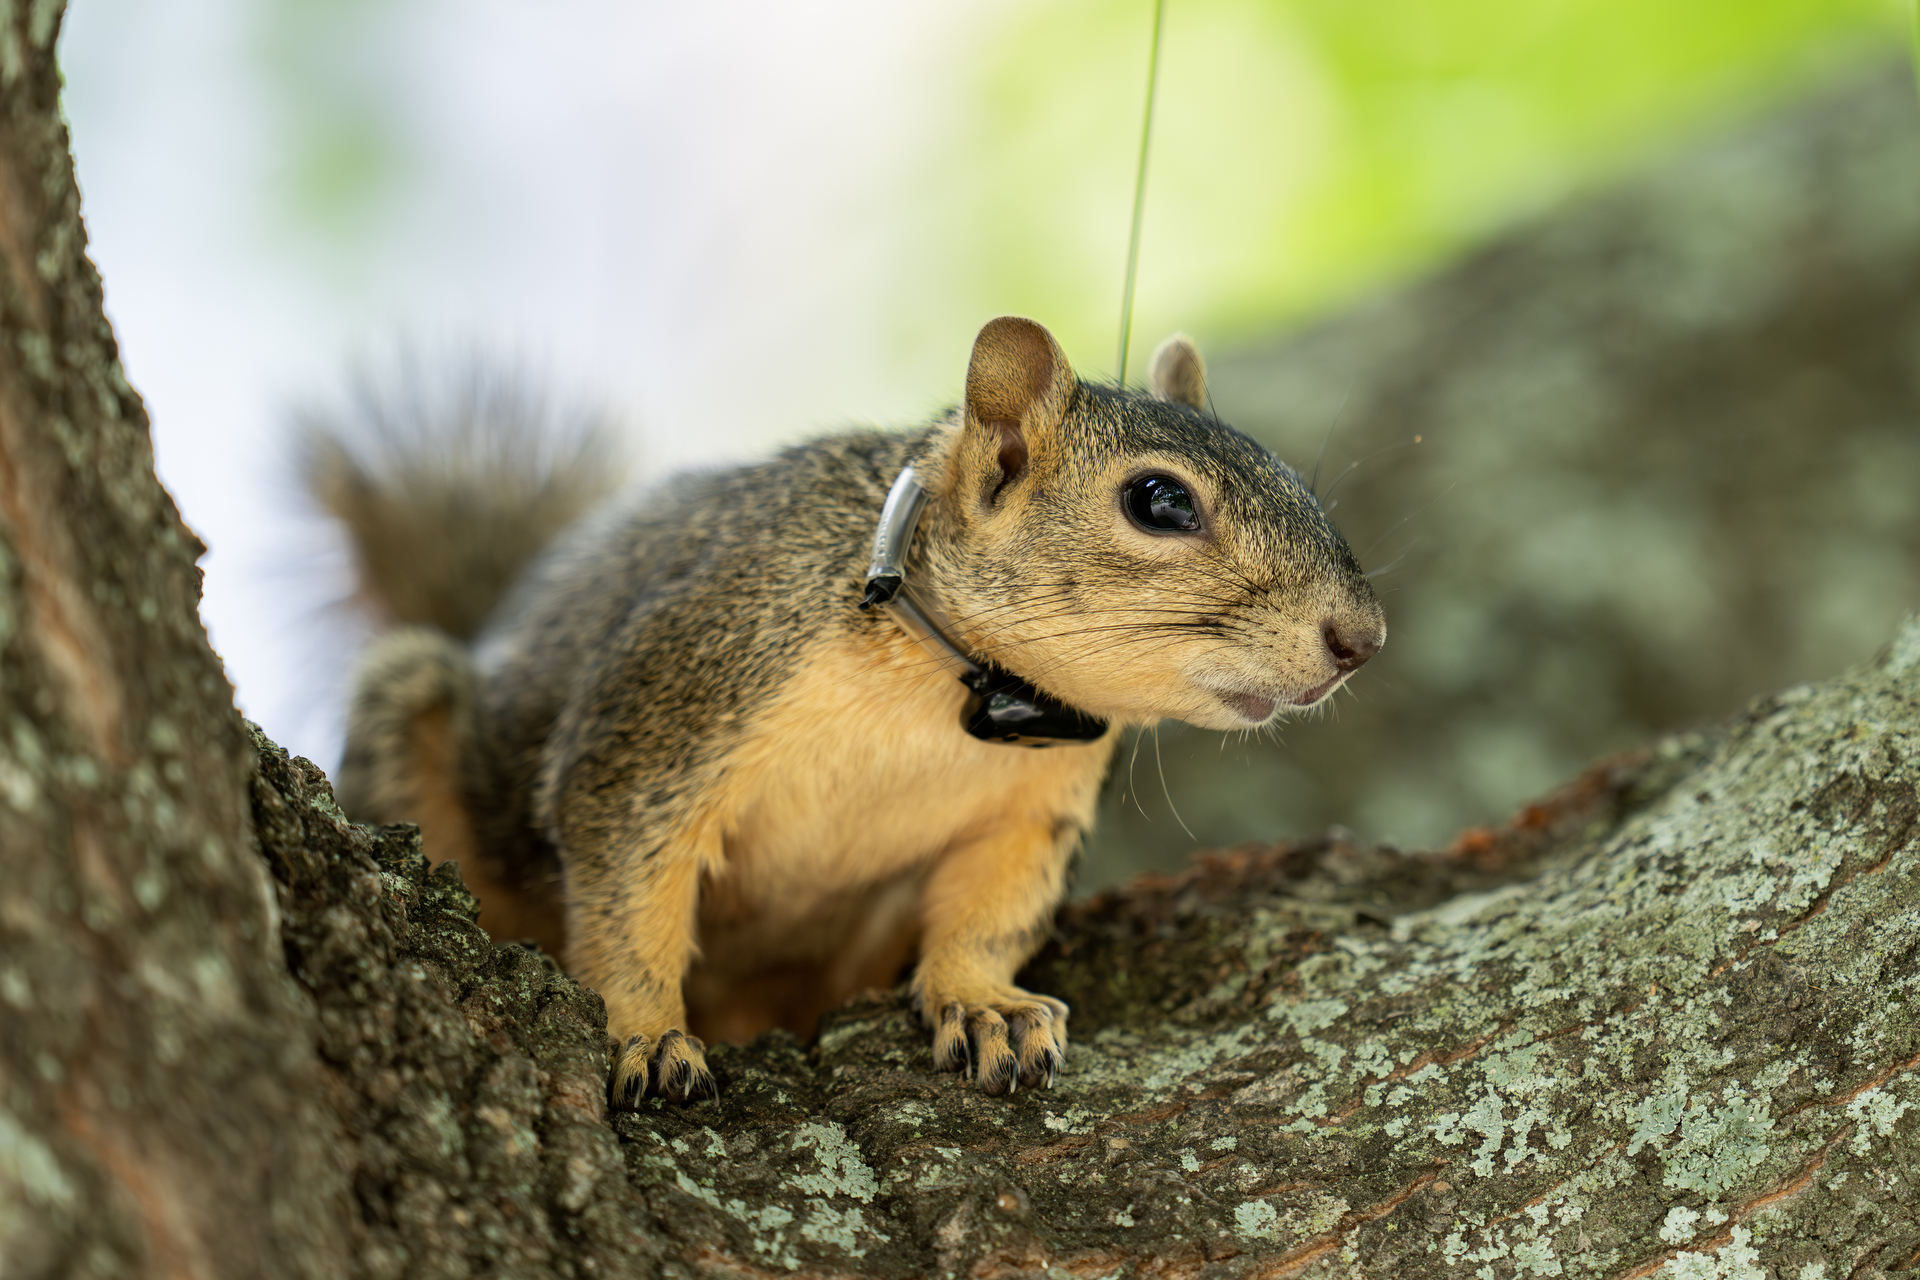 Scholarly squirrels: Exploring the dynamics of campus wildlife